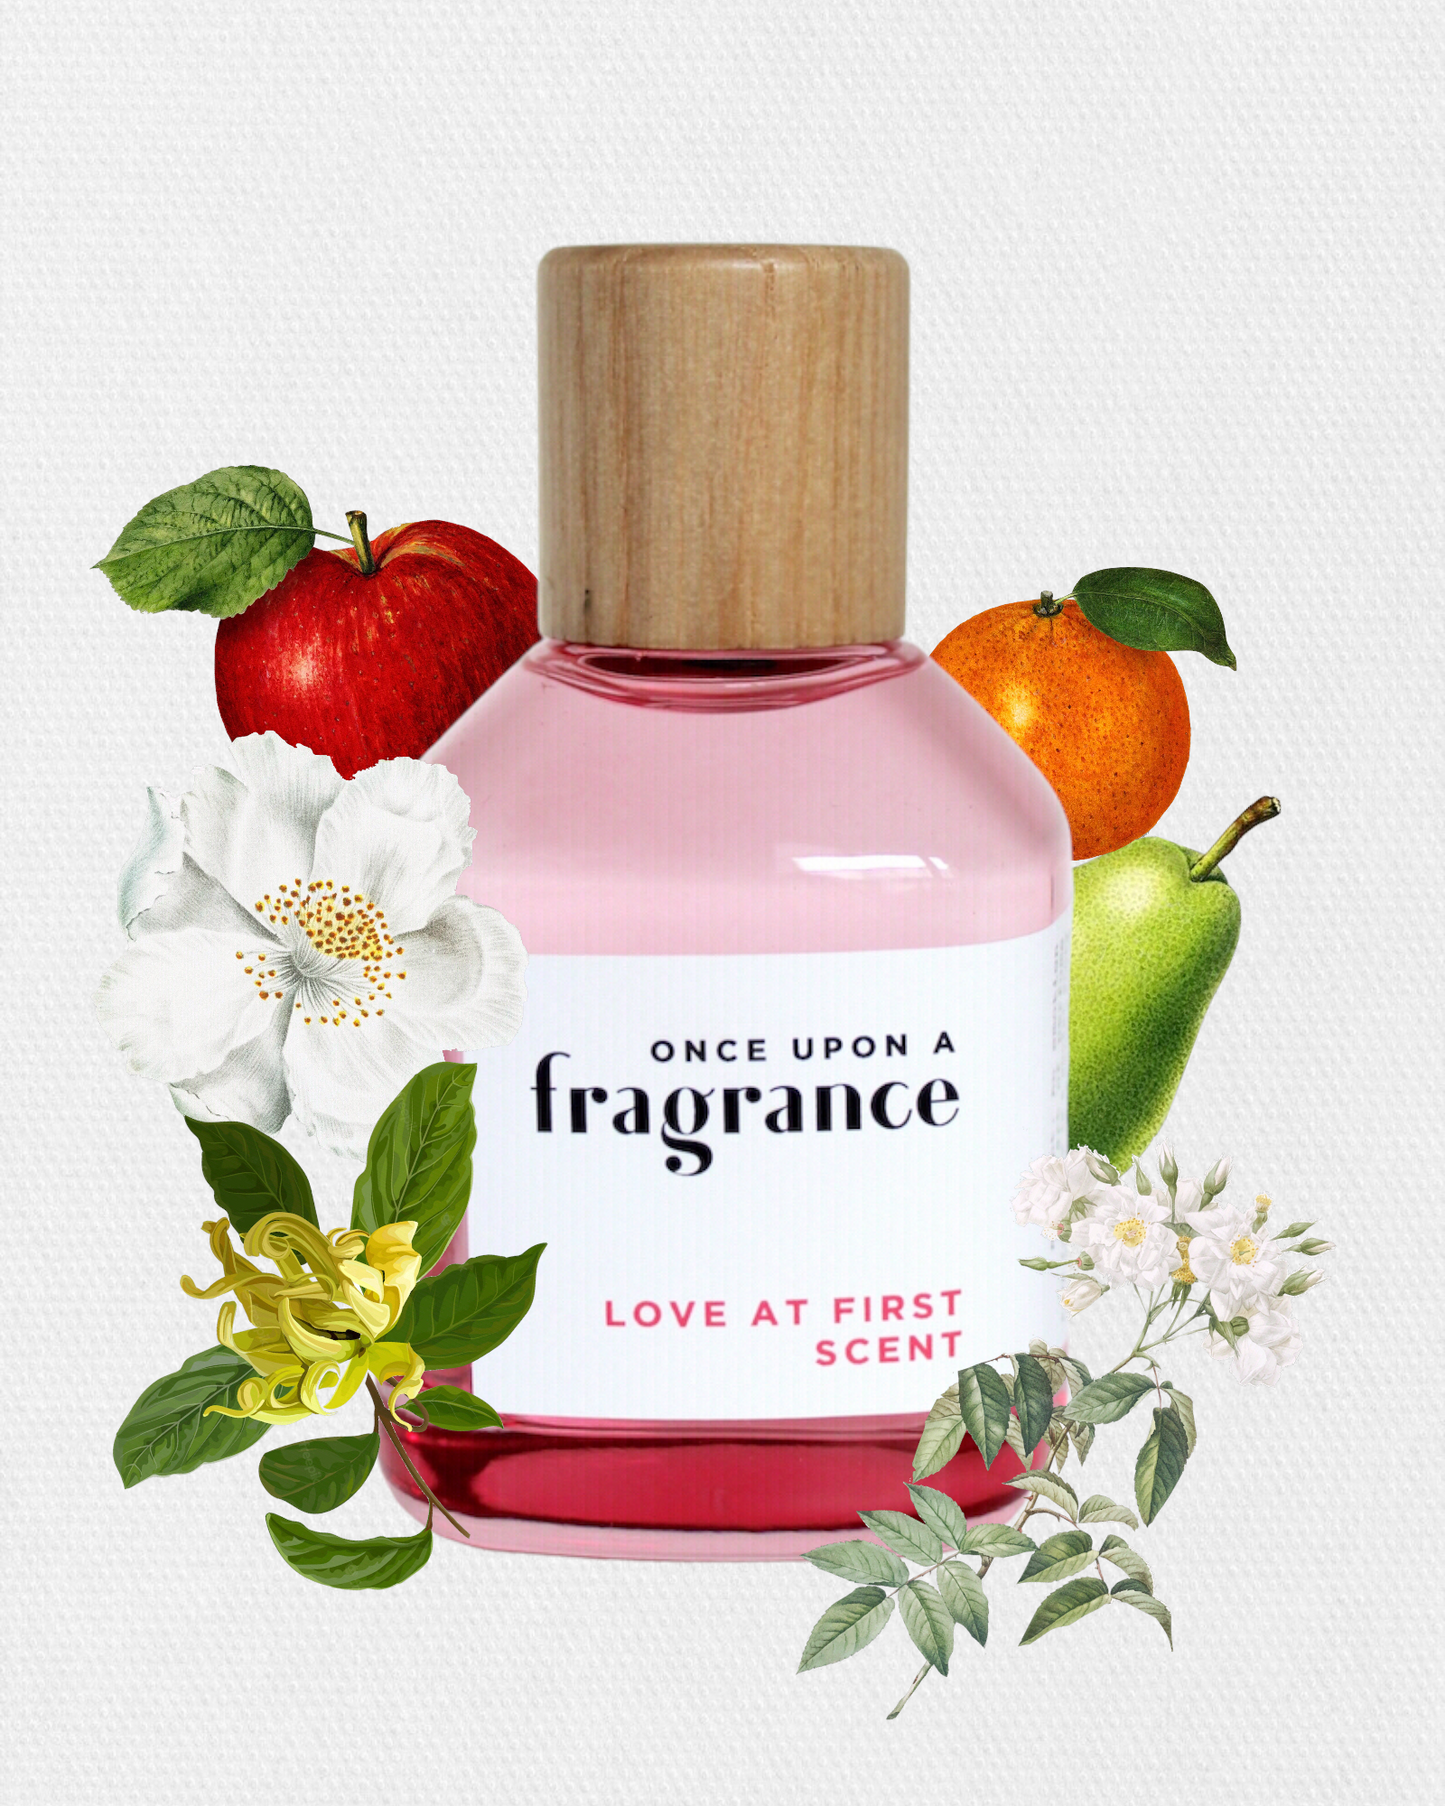 LOVE AT FIRST SCENT